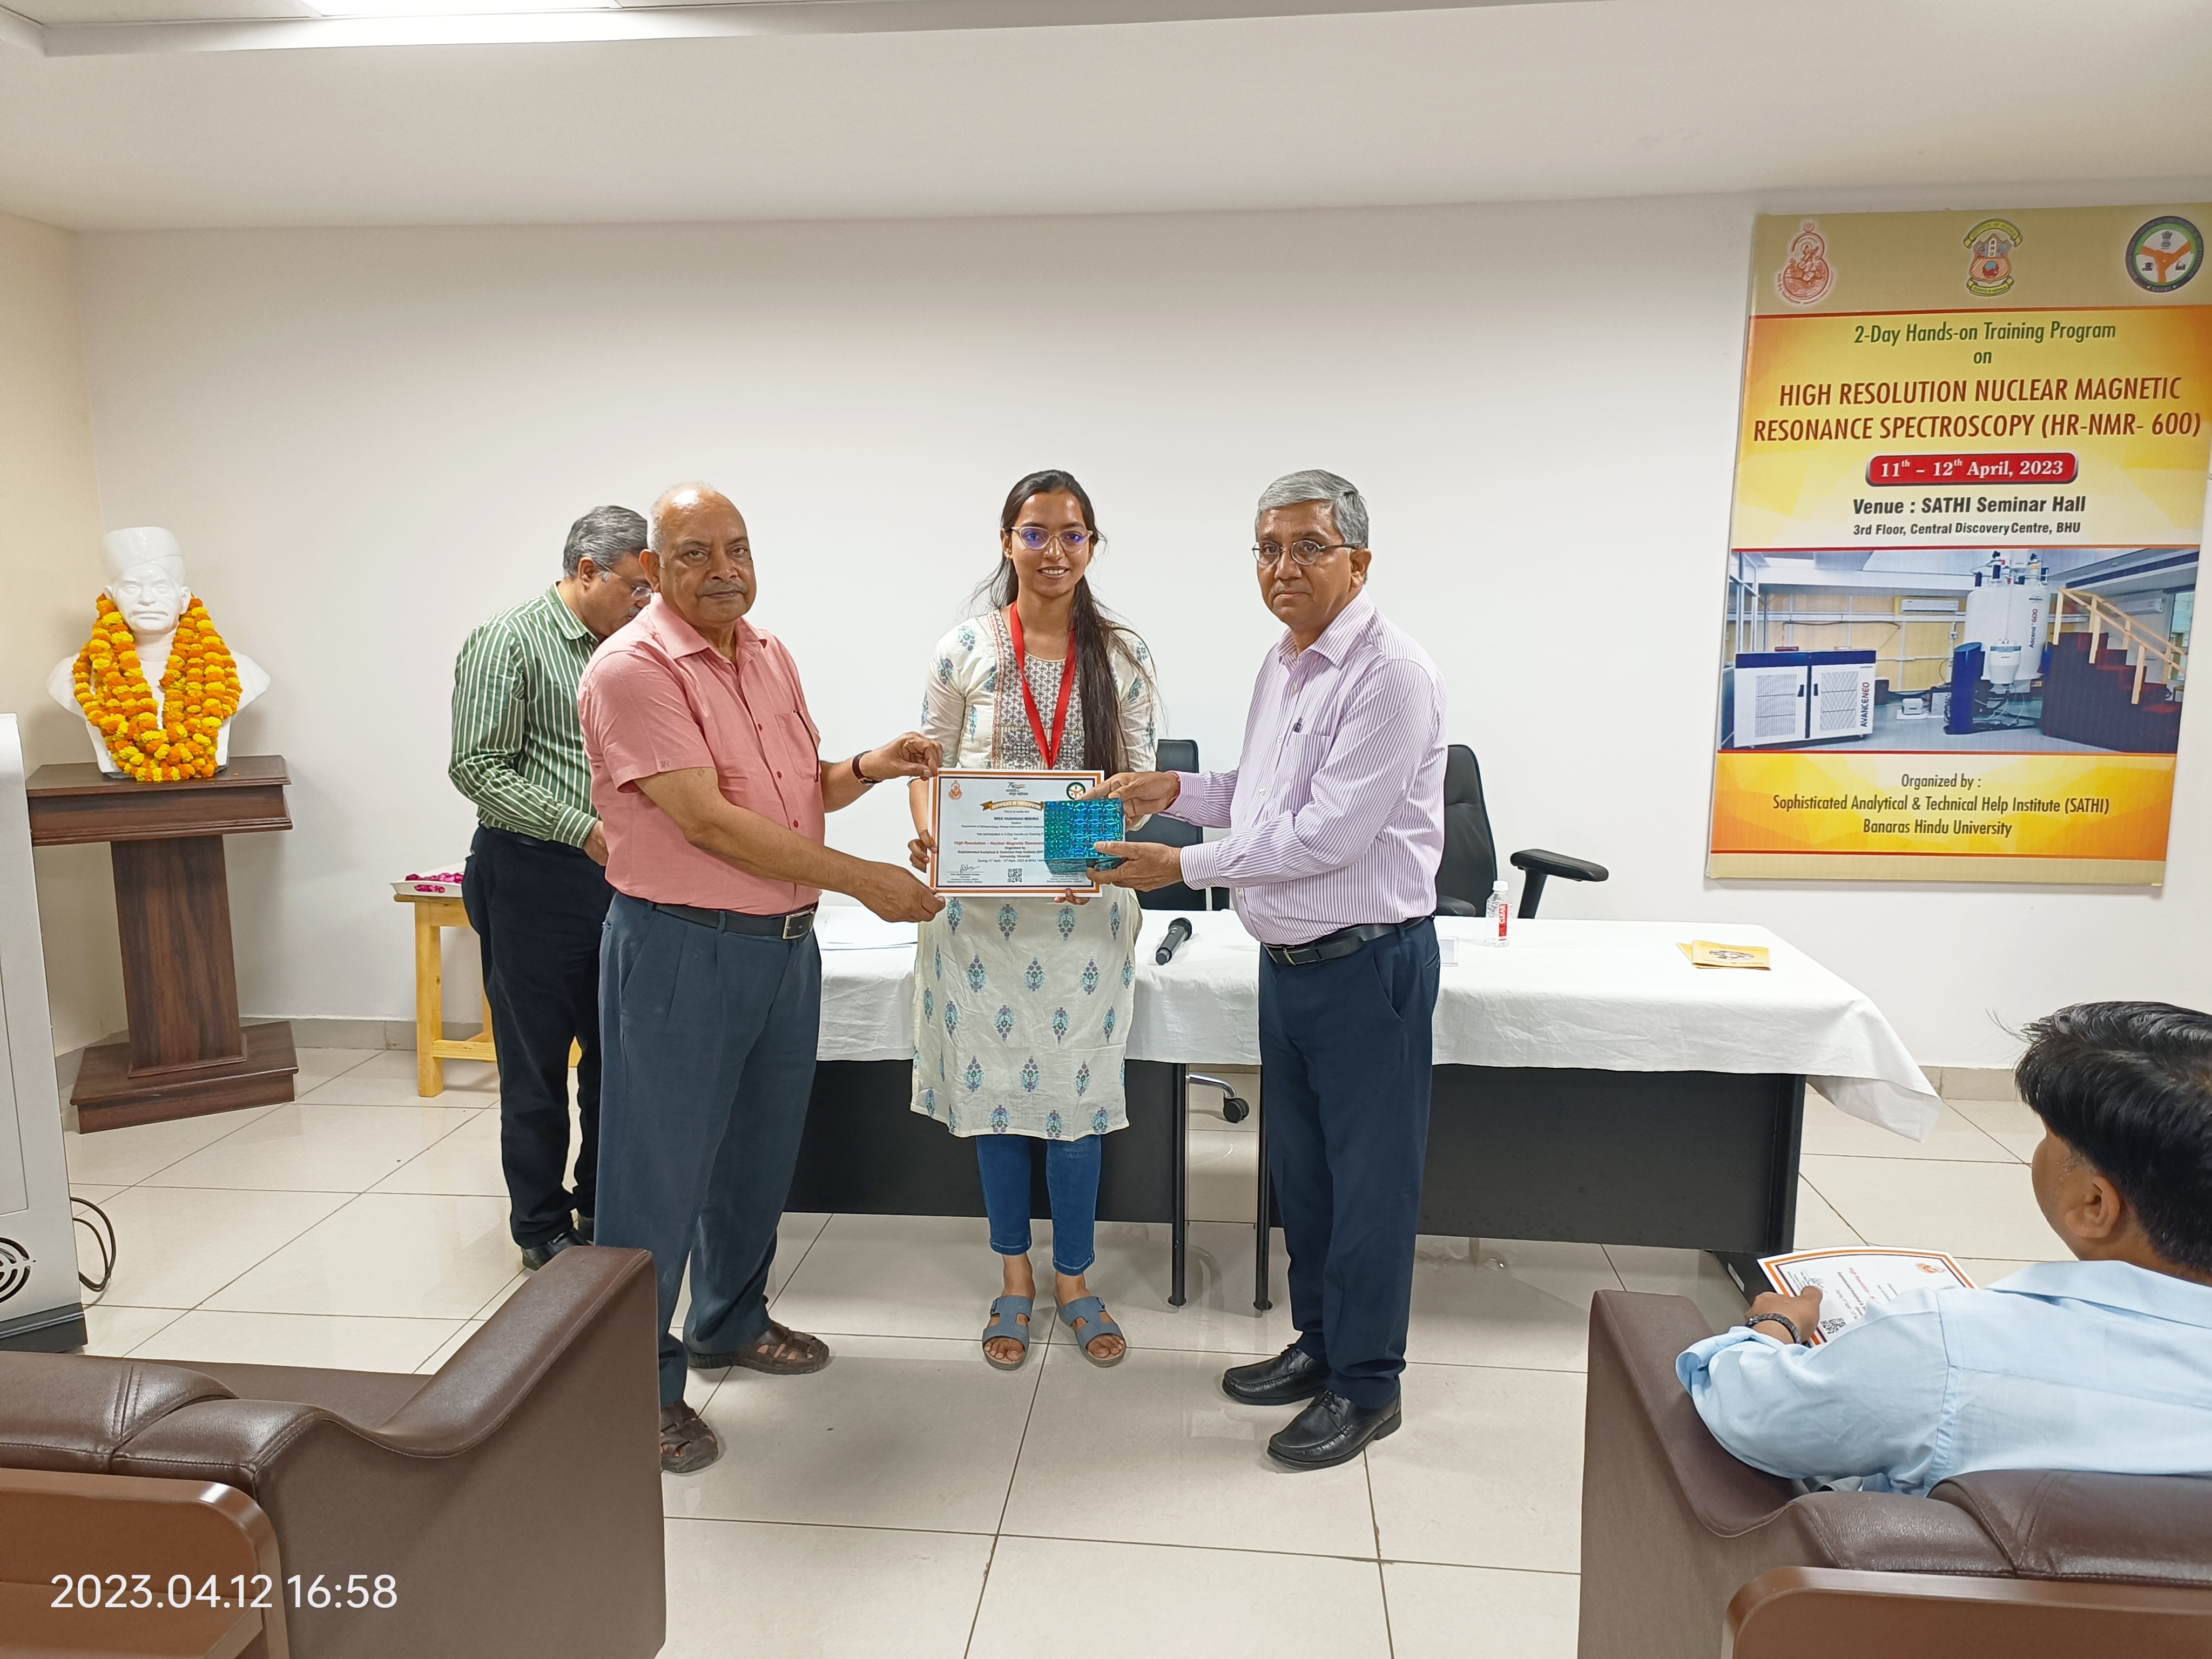 Certificate Distribution at Valedictory function of 2-Day Hands-on Training Program on High Resolution – Nuclear Magnetic Resonance Spectroscopy (HR-NMR- 600) Equipment